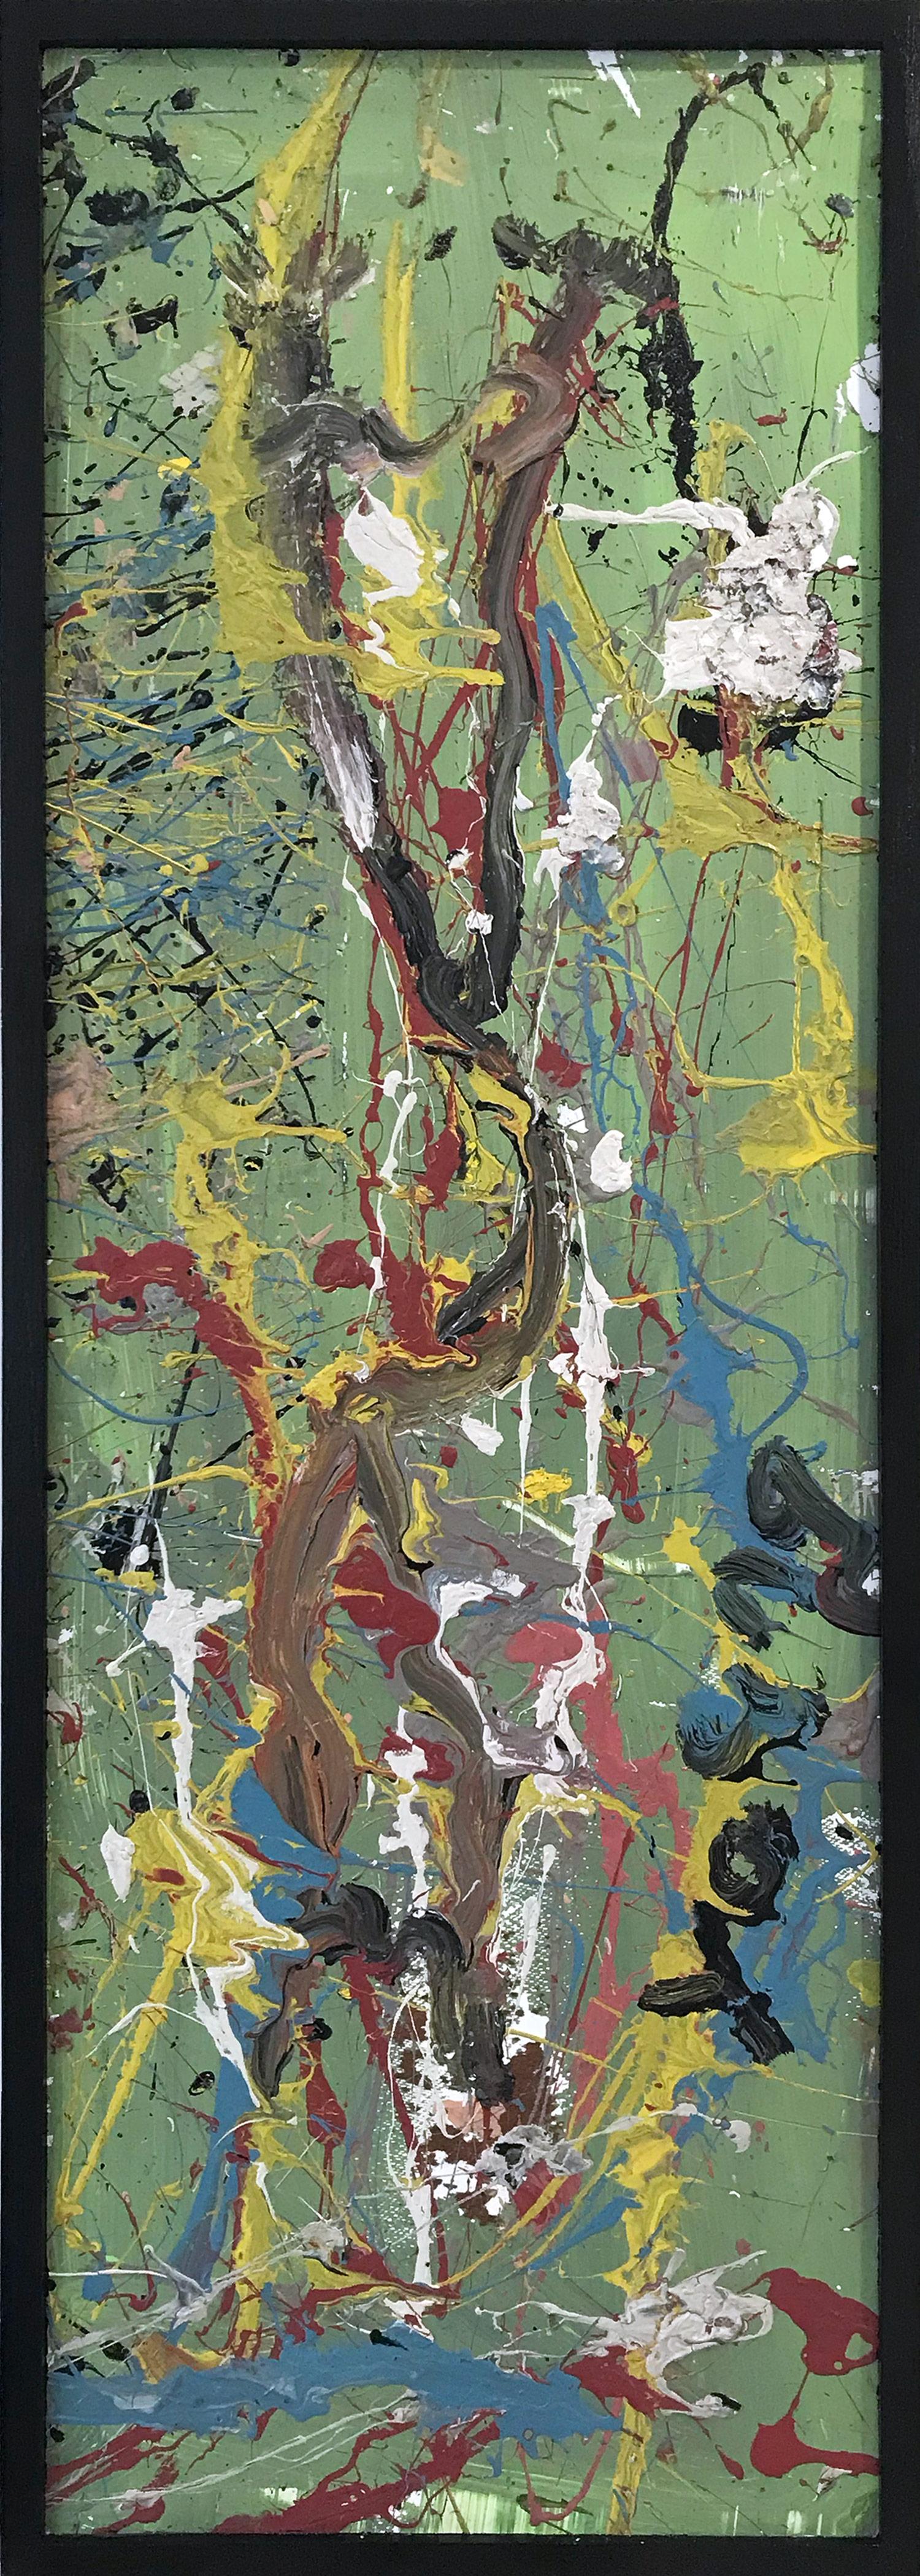 Purvis Young Landscape Painting - "Abstract" Jackson Pollock Style Mid Century Modern Oil Painting on Wood Framed